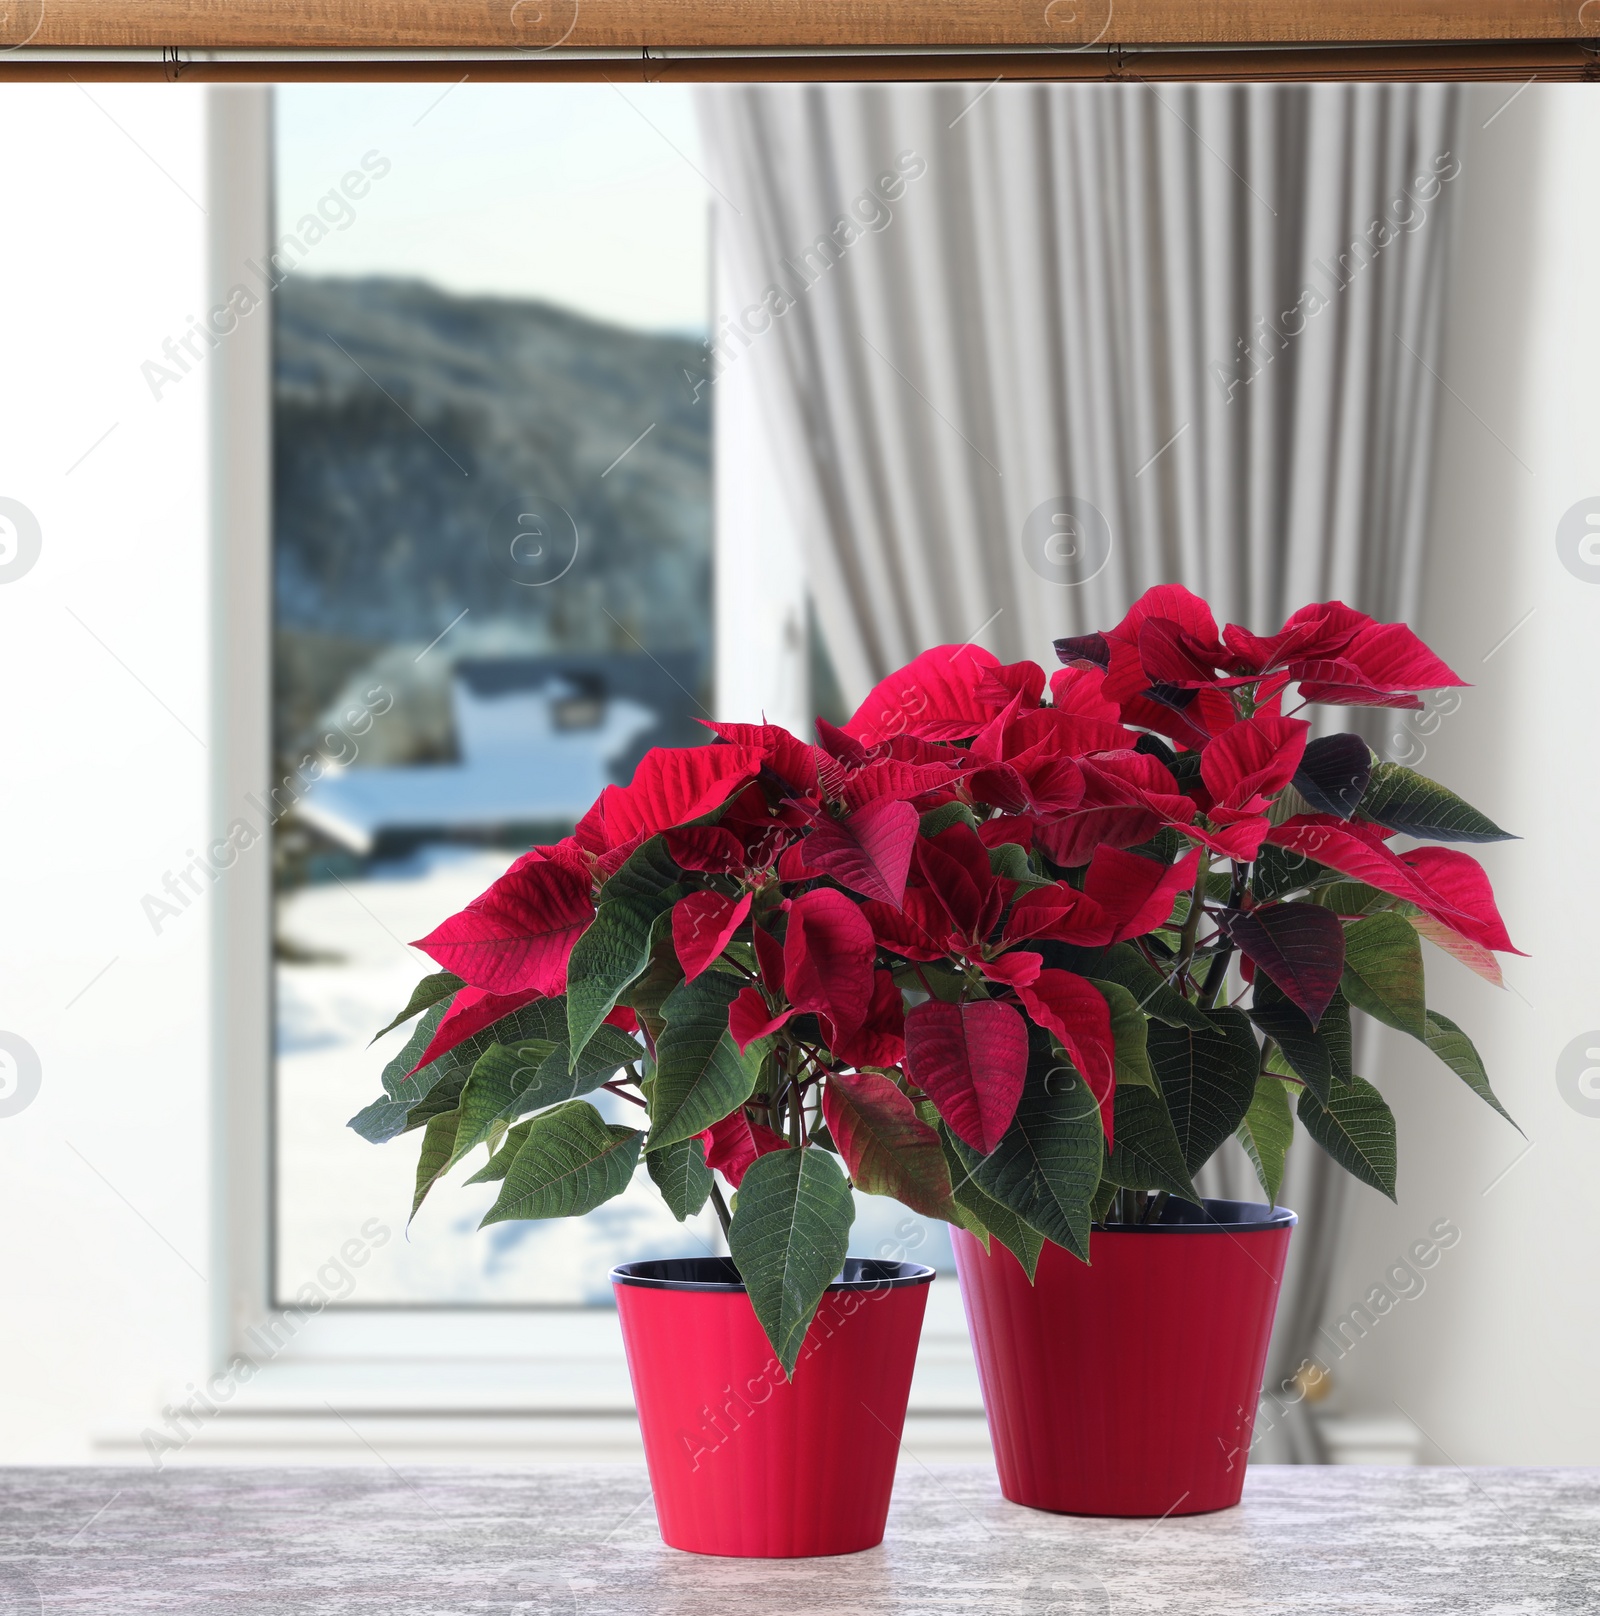 Image of Christmas traditional poinsettia flowers in pots on table near window